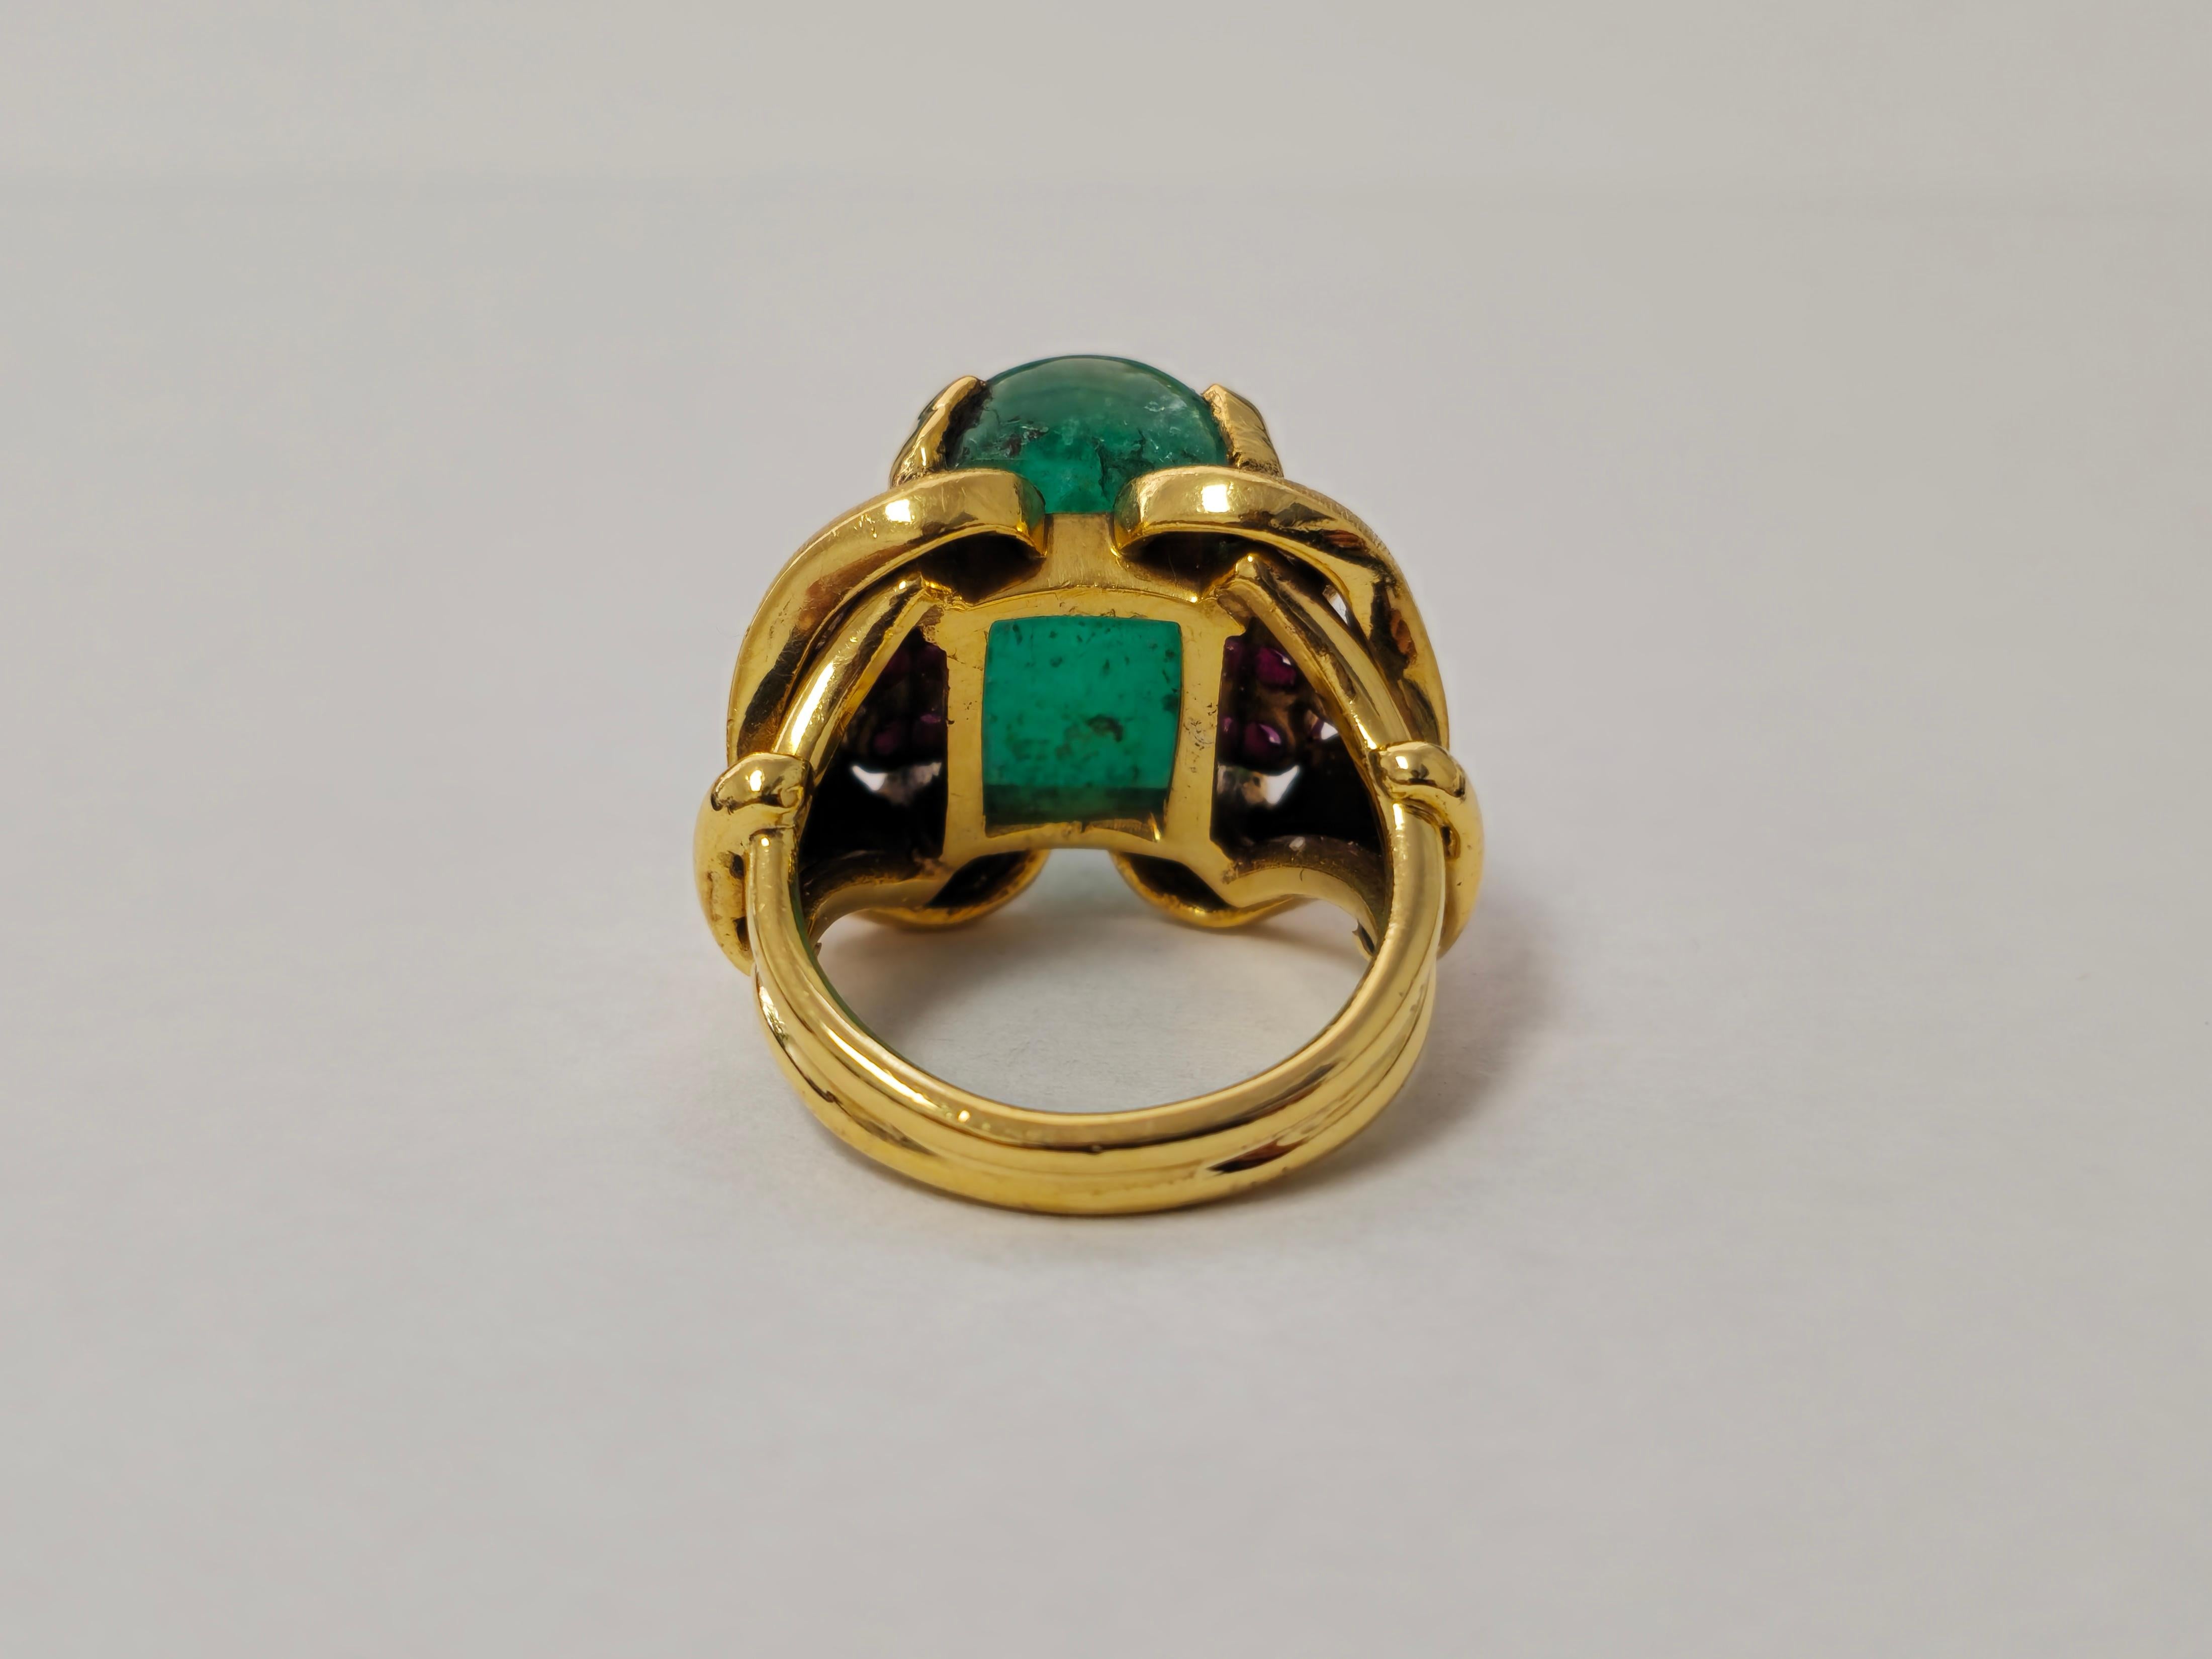 Edwardian Rare 12.11 Carat Colombian Emerald & Ruby Ring in 14k Gold For Sale